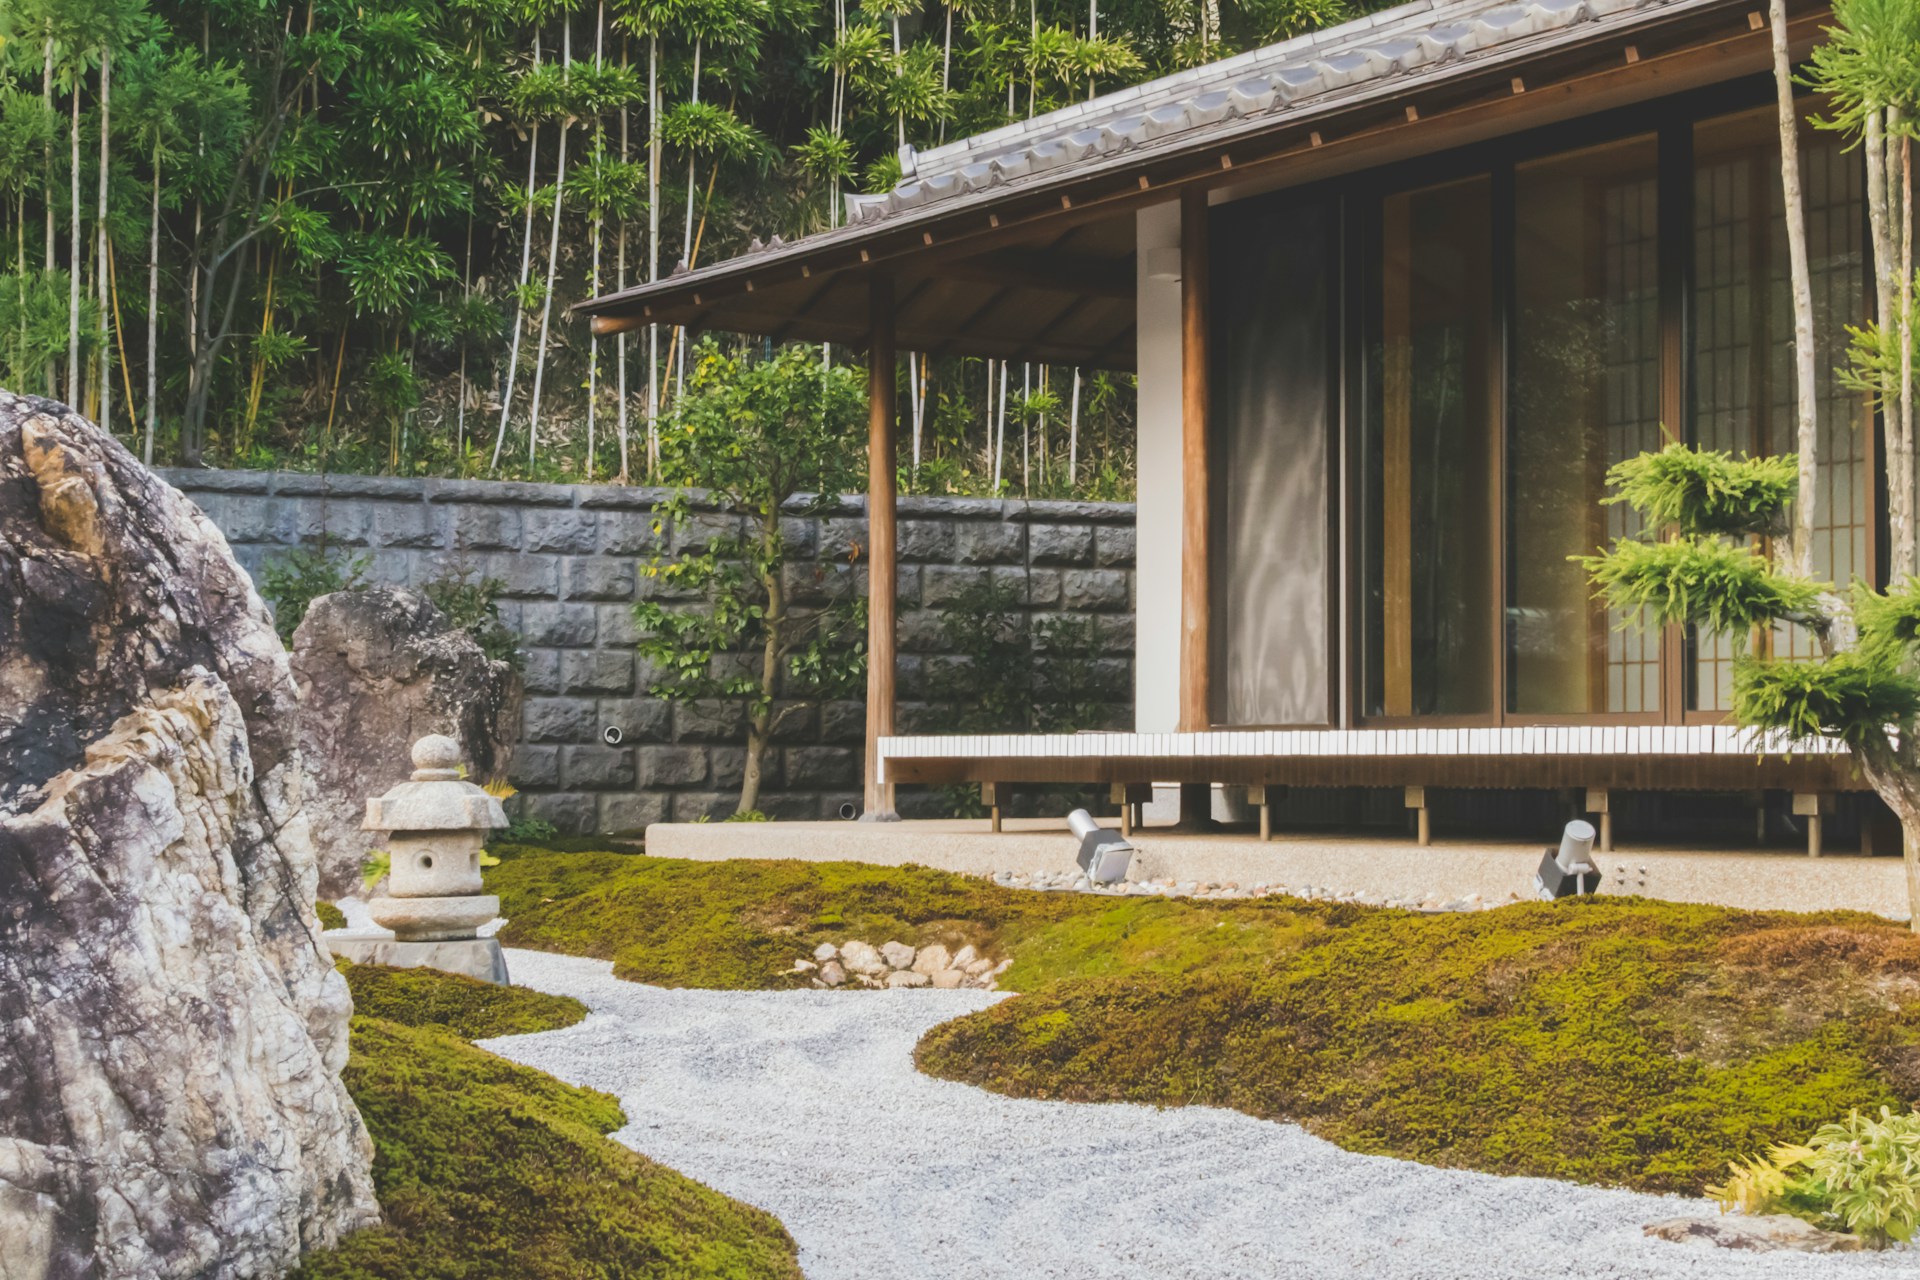 Garden, wooden house with glass sliding doors. Image by Usplash